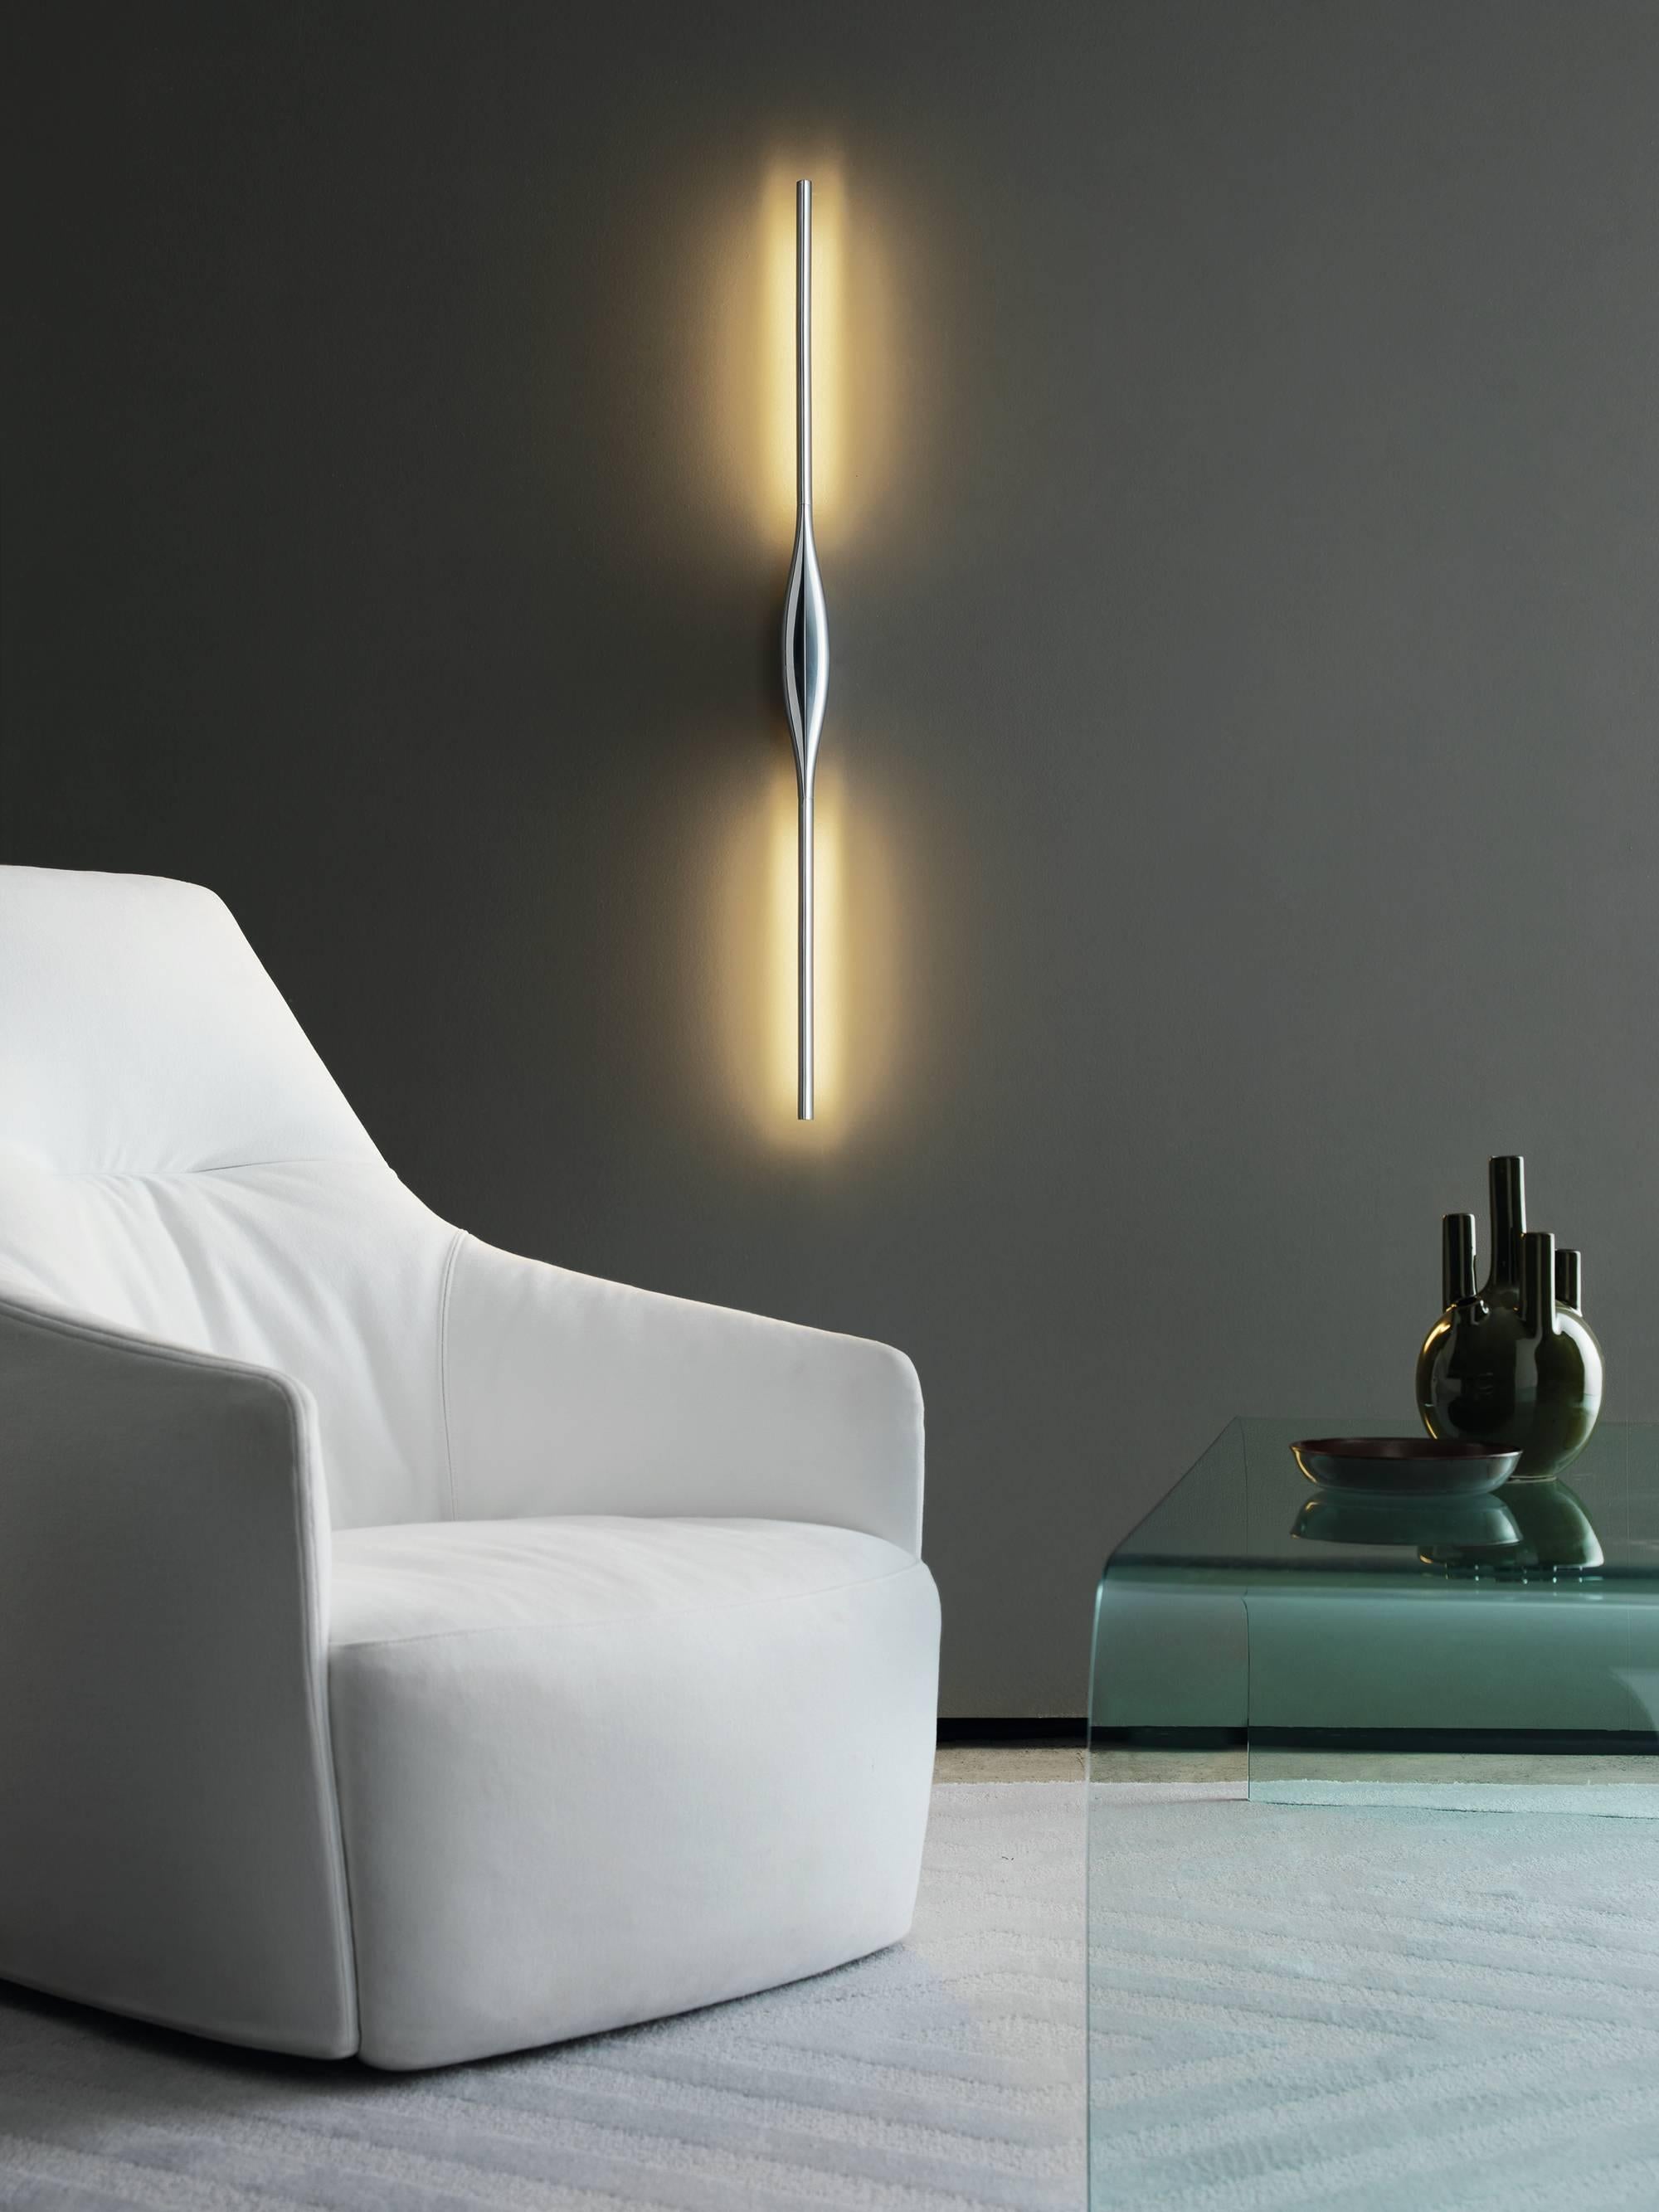 The Apex is a wall lamp in metal and polymer by designer Karim Rashid manufactured by Fontana Arte, 2017, is distinguished by its elegant, streamlined design and eye-shaped centre. Each end of the lighting fixture tapers off and almost disappears